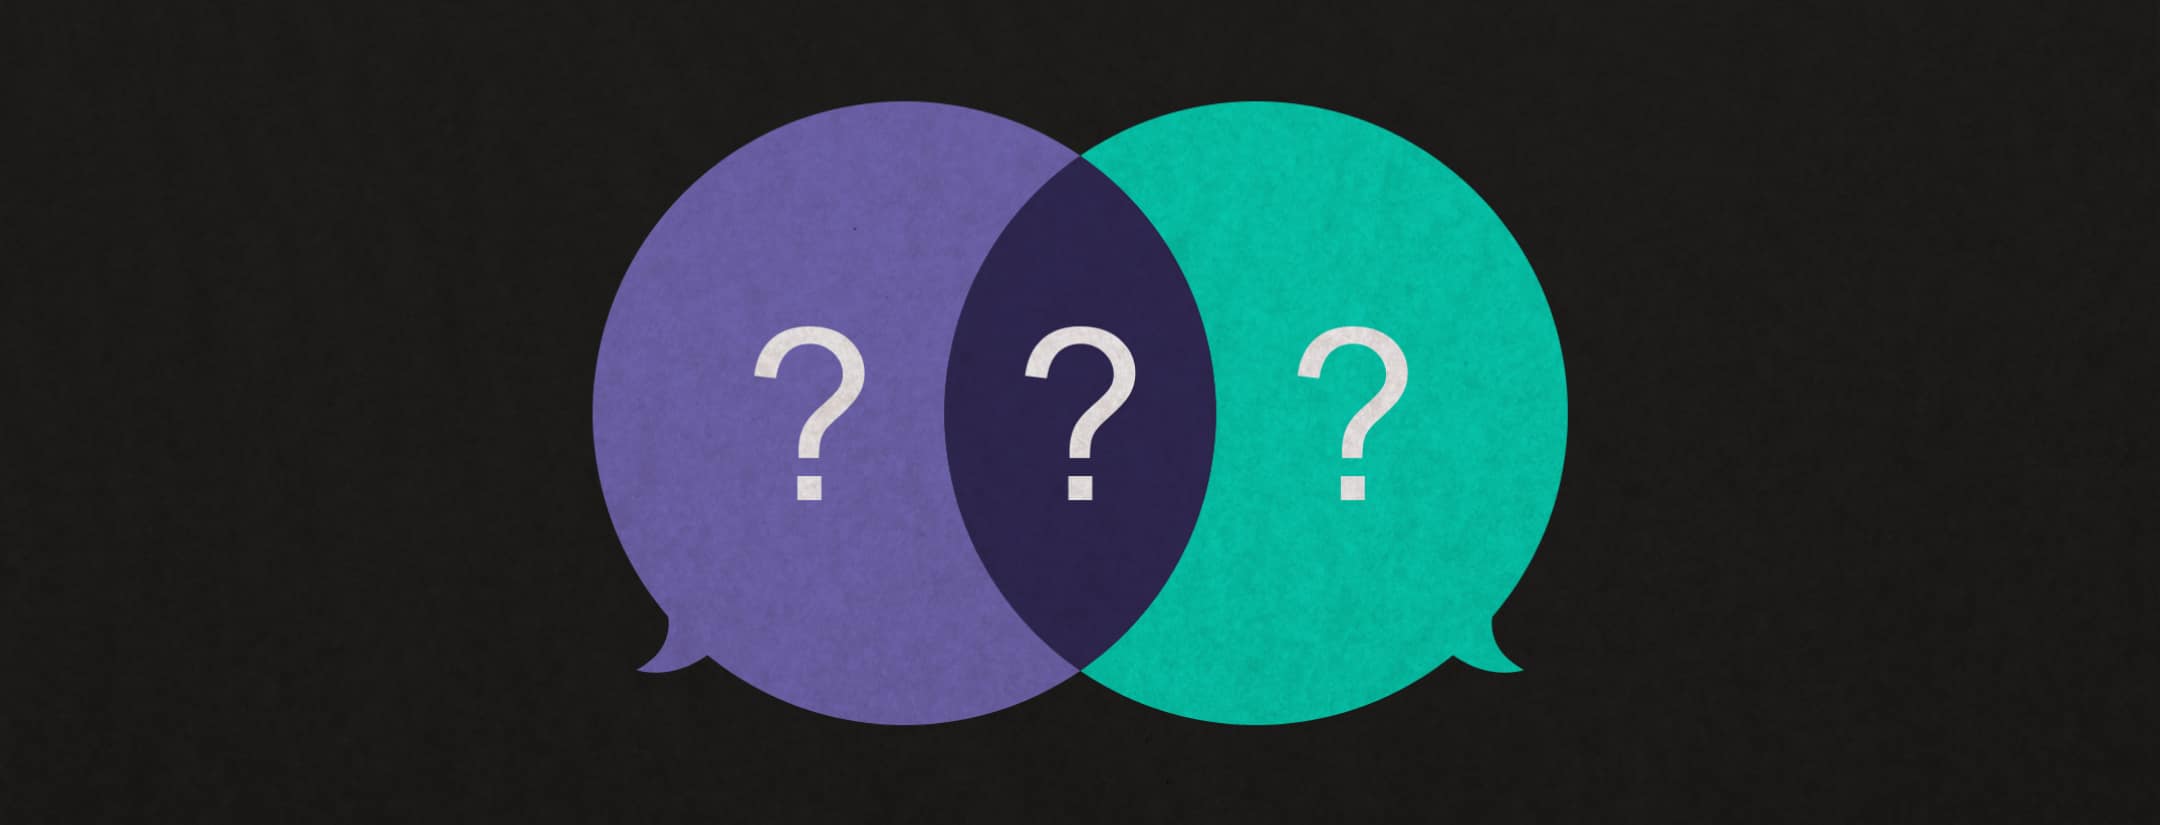 Do You Ask These Three Essential Project Stakeholder Questions?